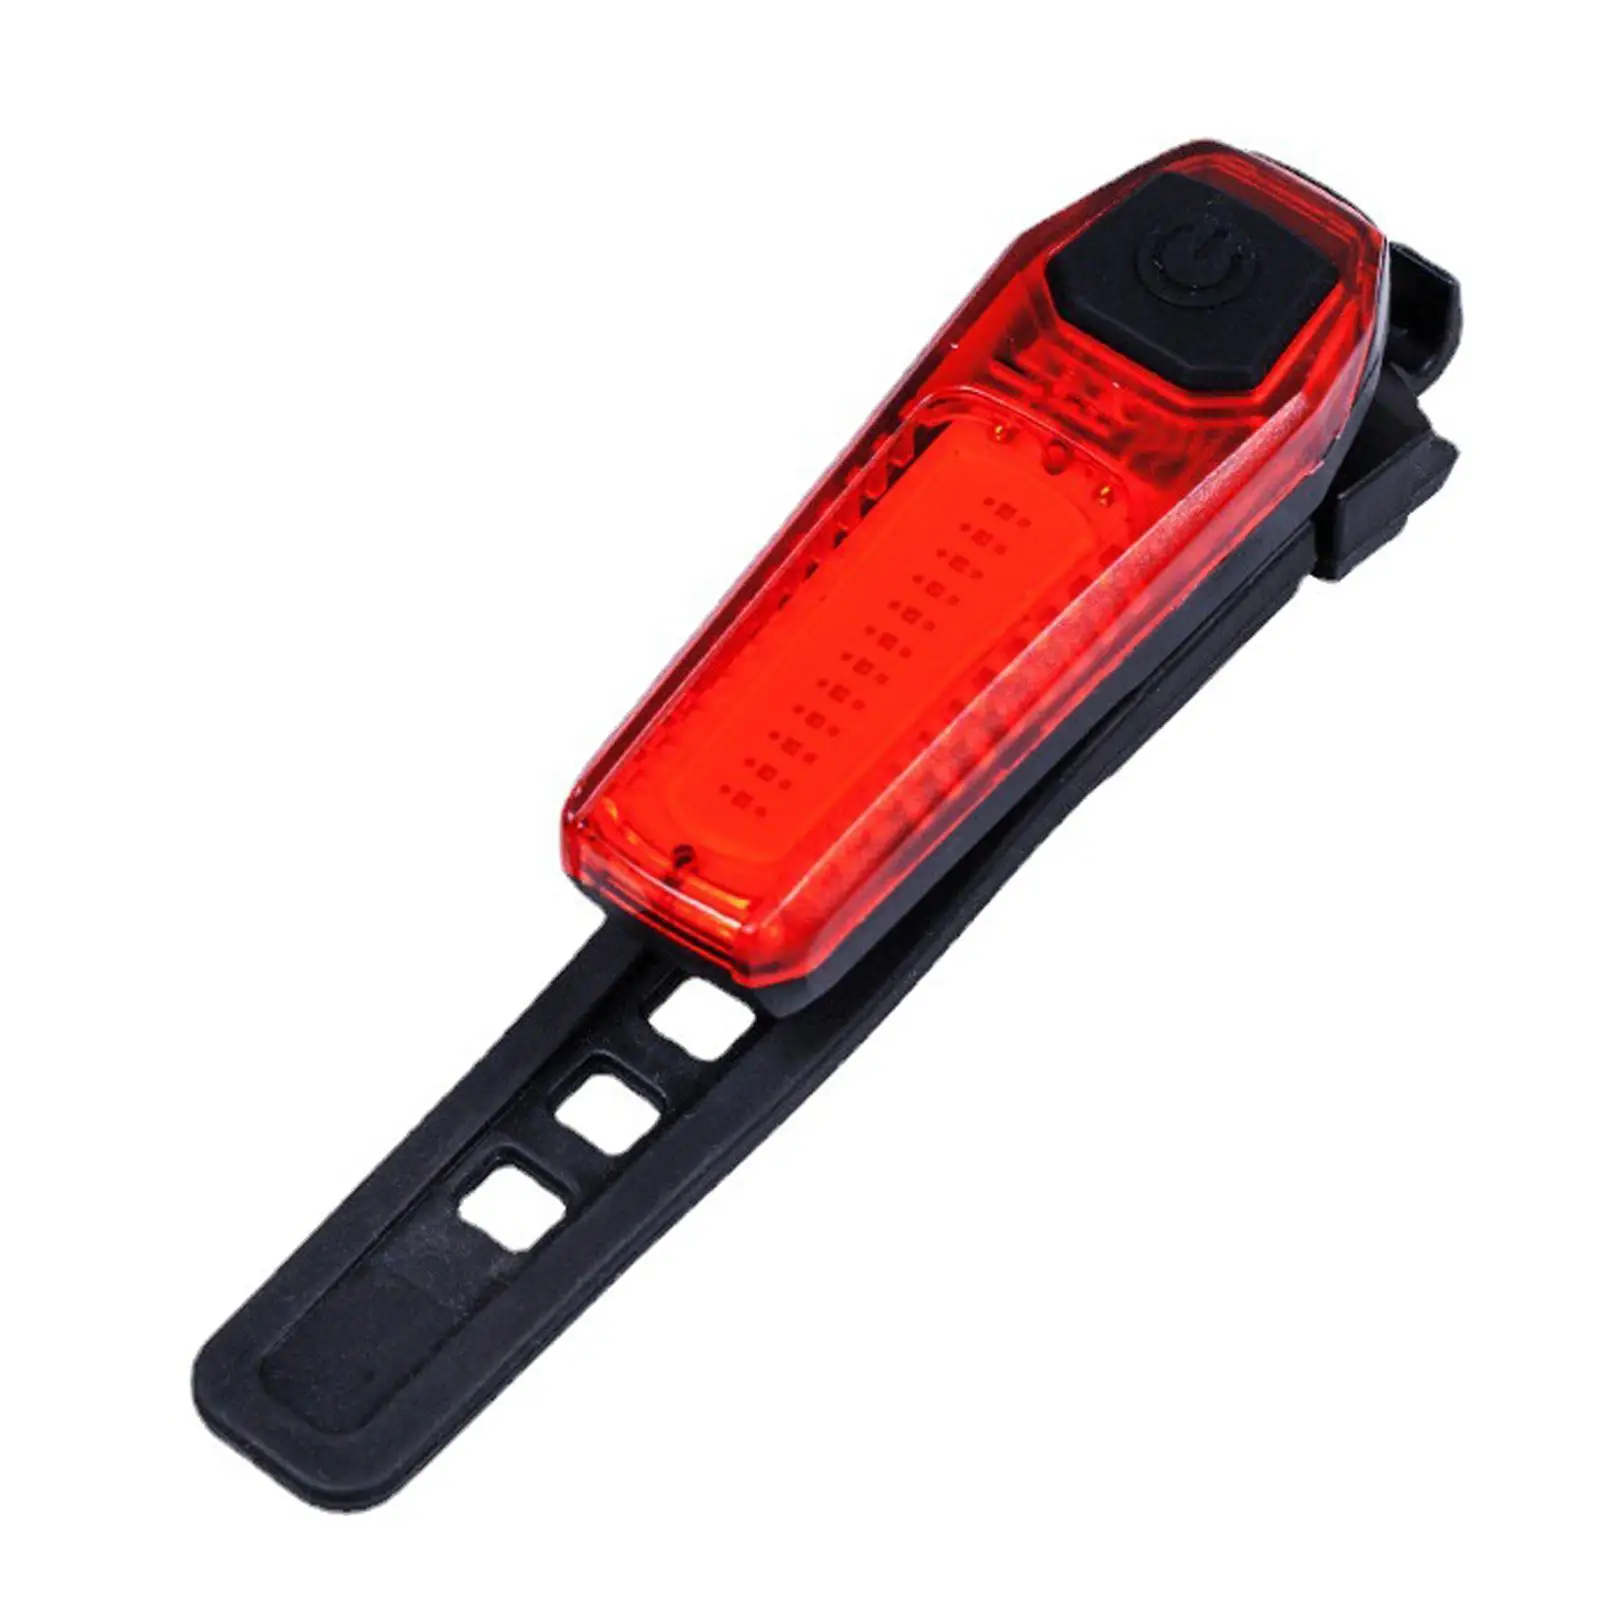 tail lamp Light Rechargeable LED High Brightness USB Rechargeable Road Bike for Cargo Rack Seat Post Bike Trailer Night Riding